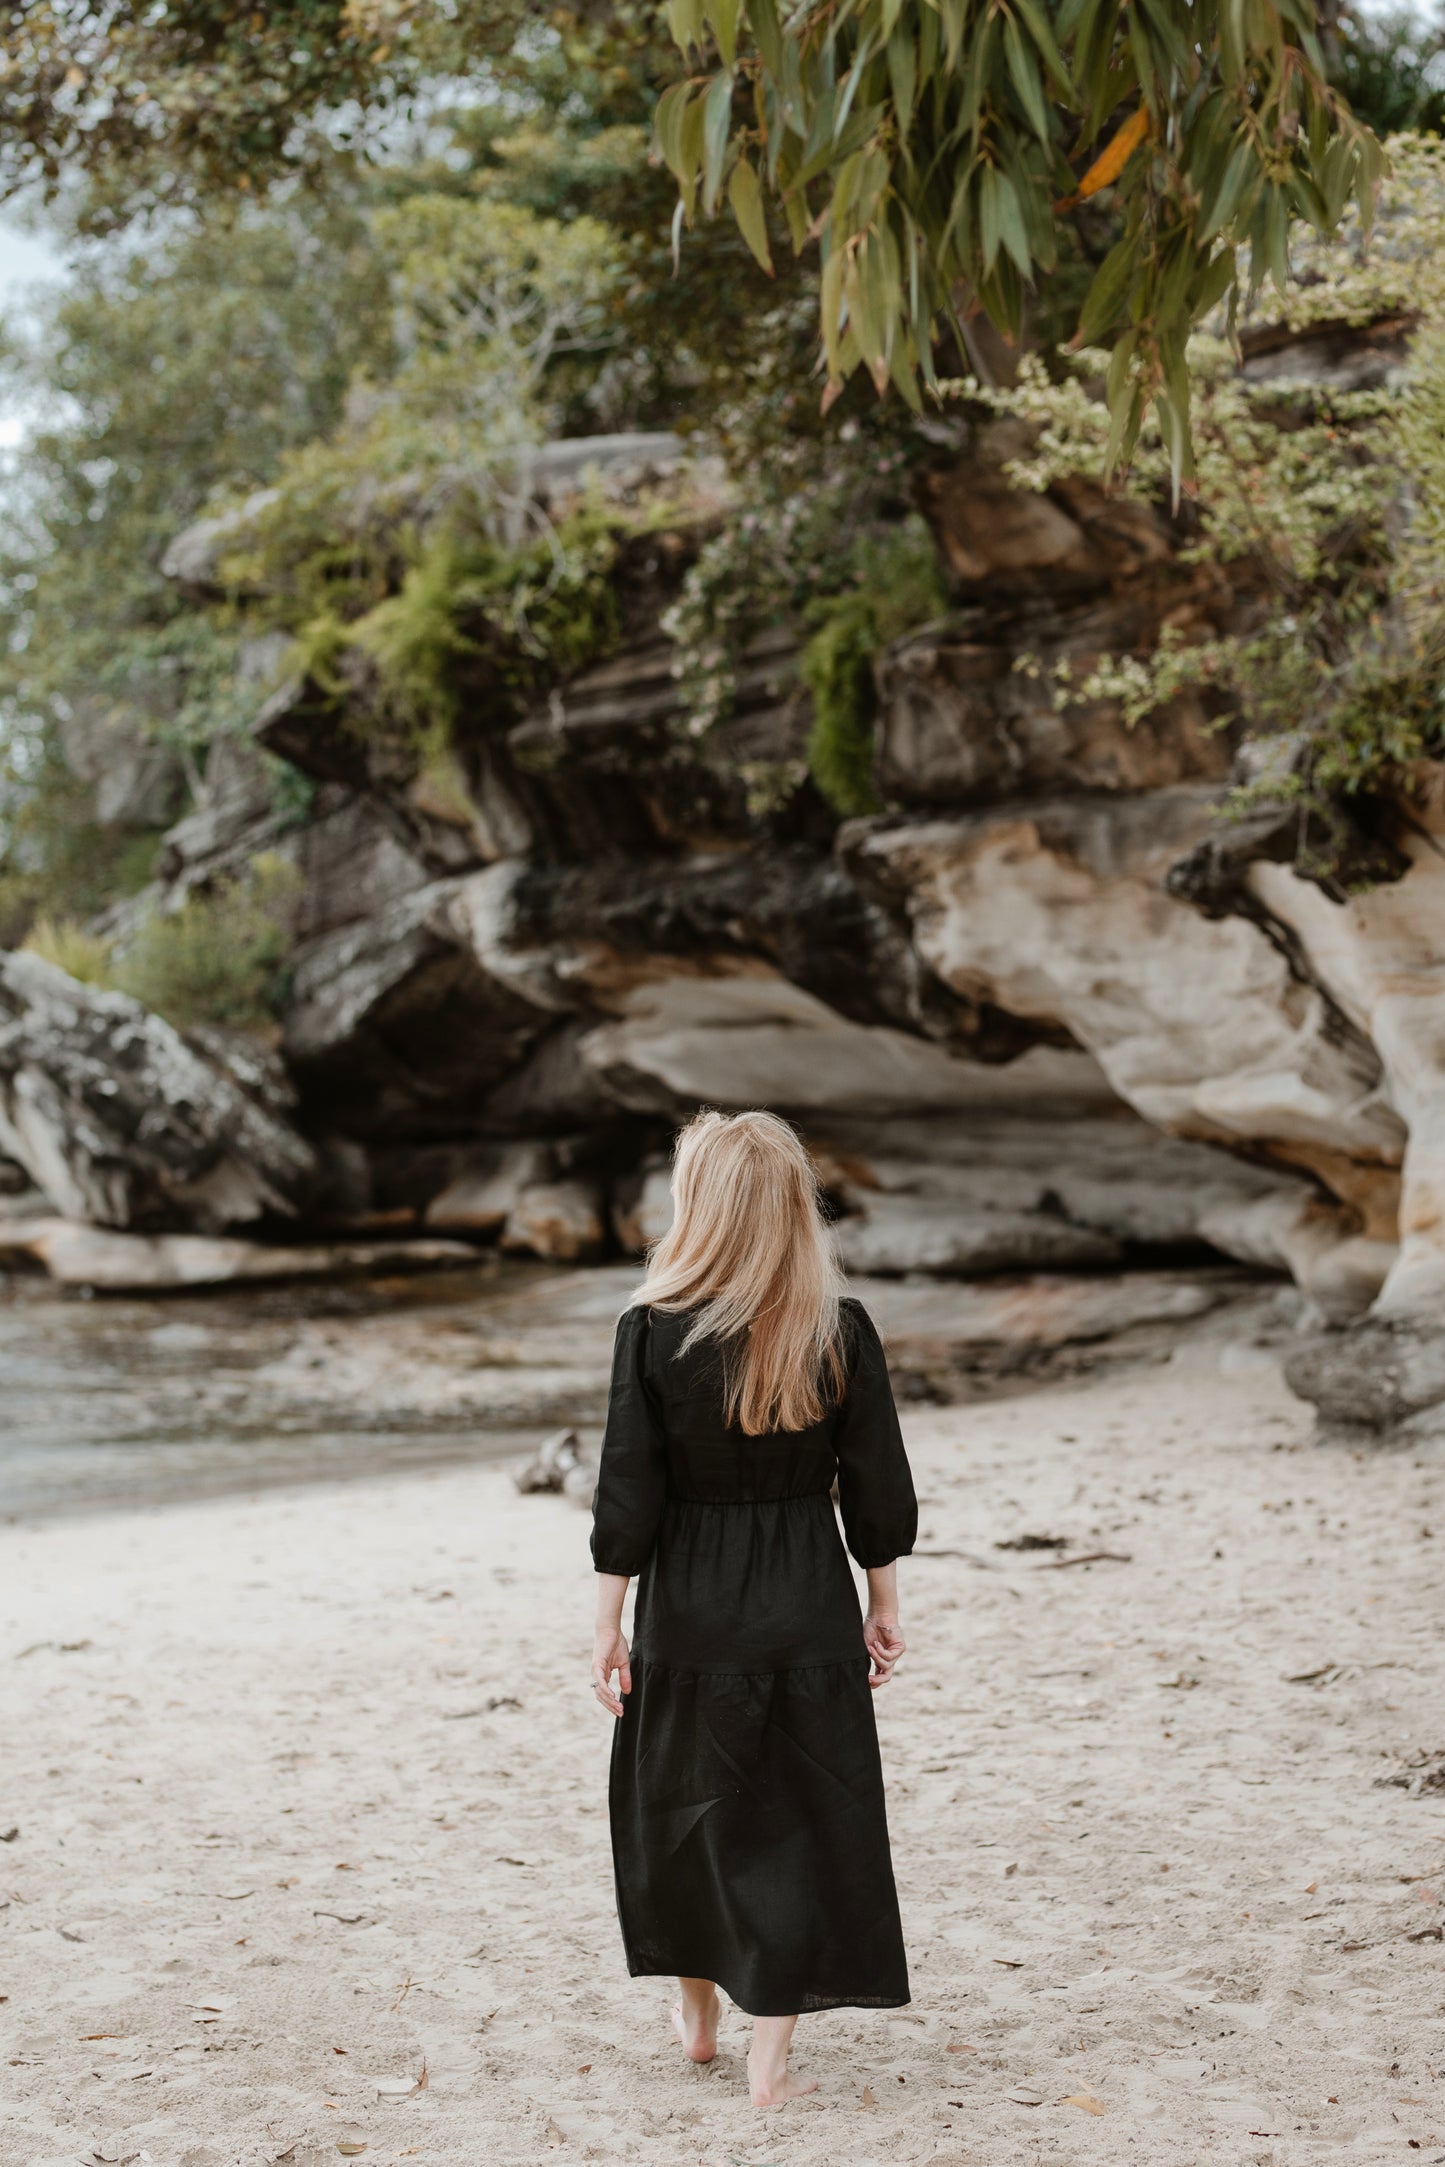 A petite woman walking on a beach with her back to the camera. She is wearing a long black linen dress.